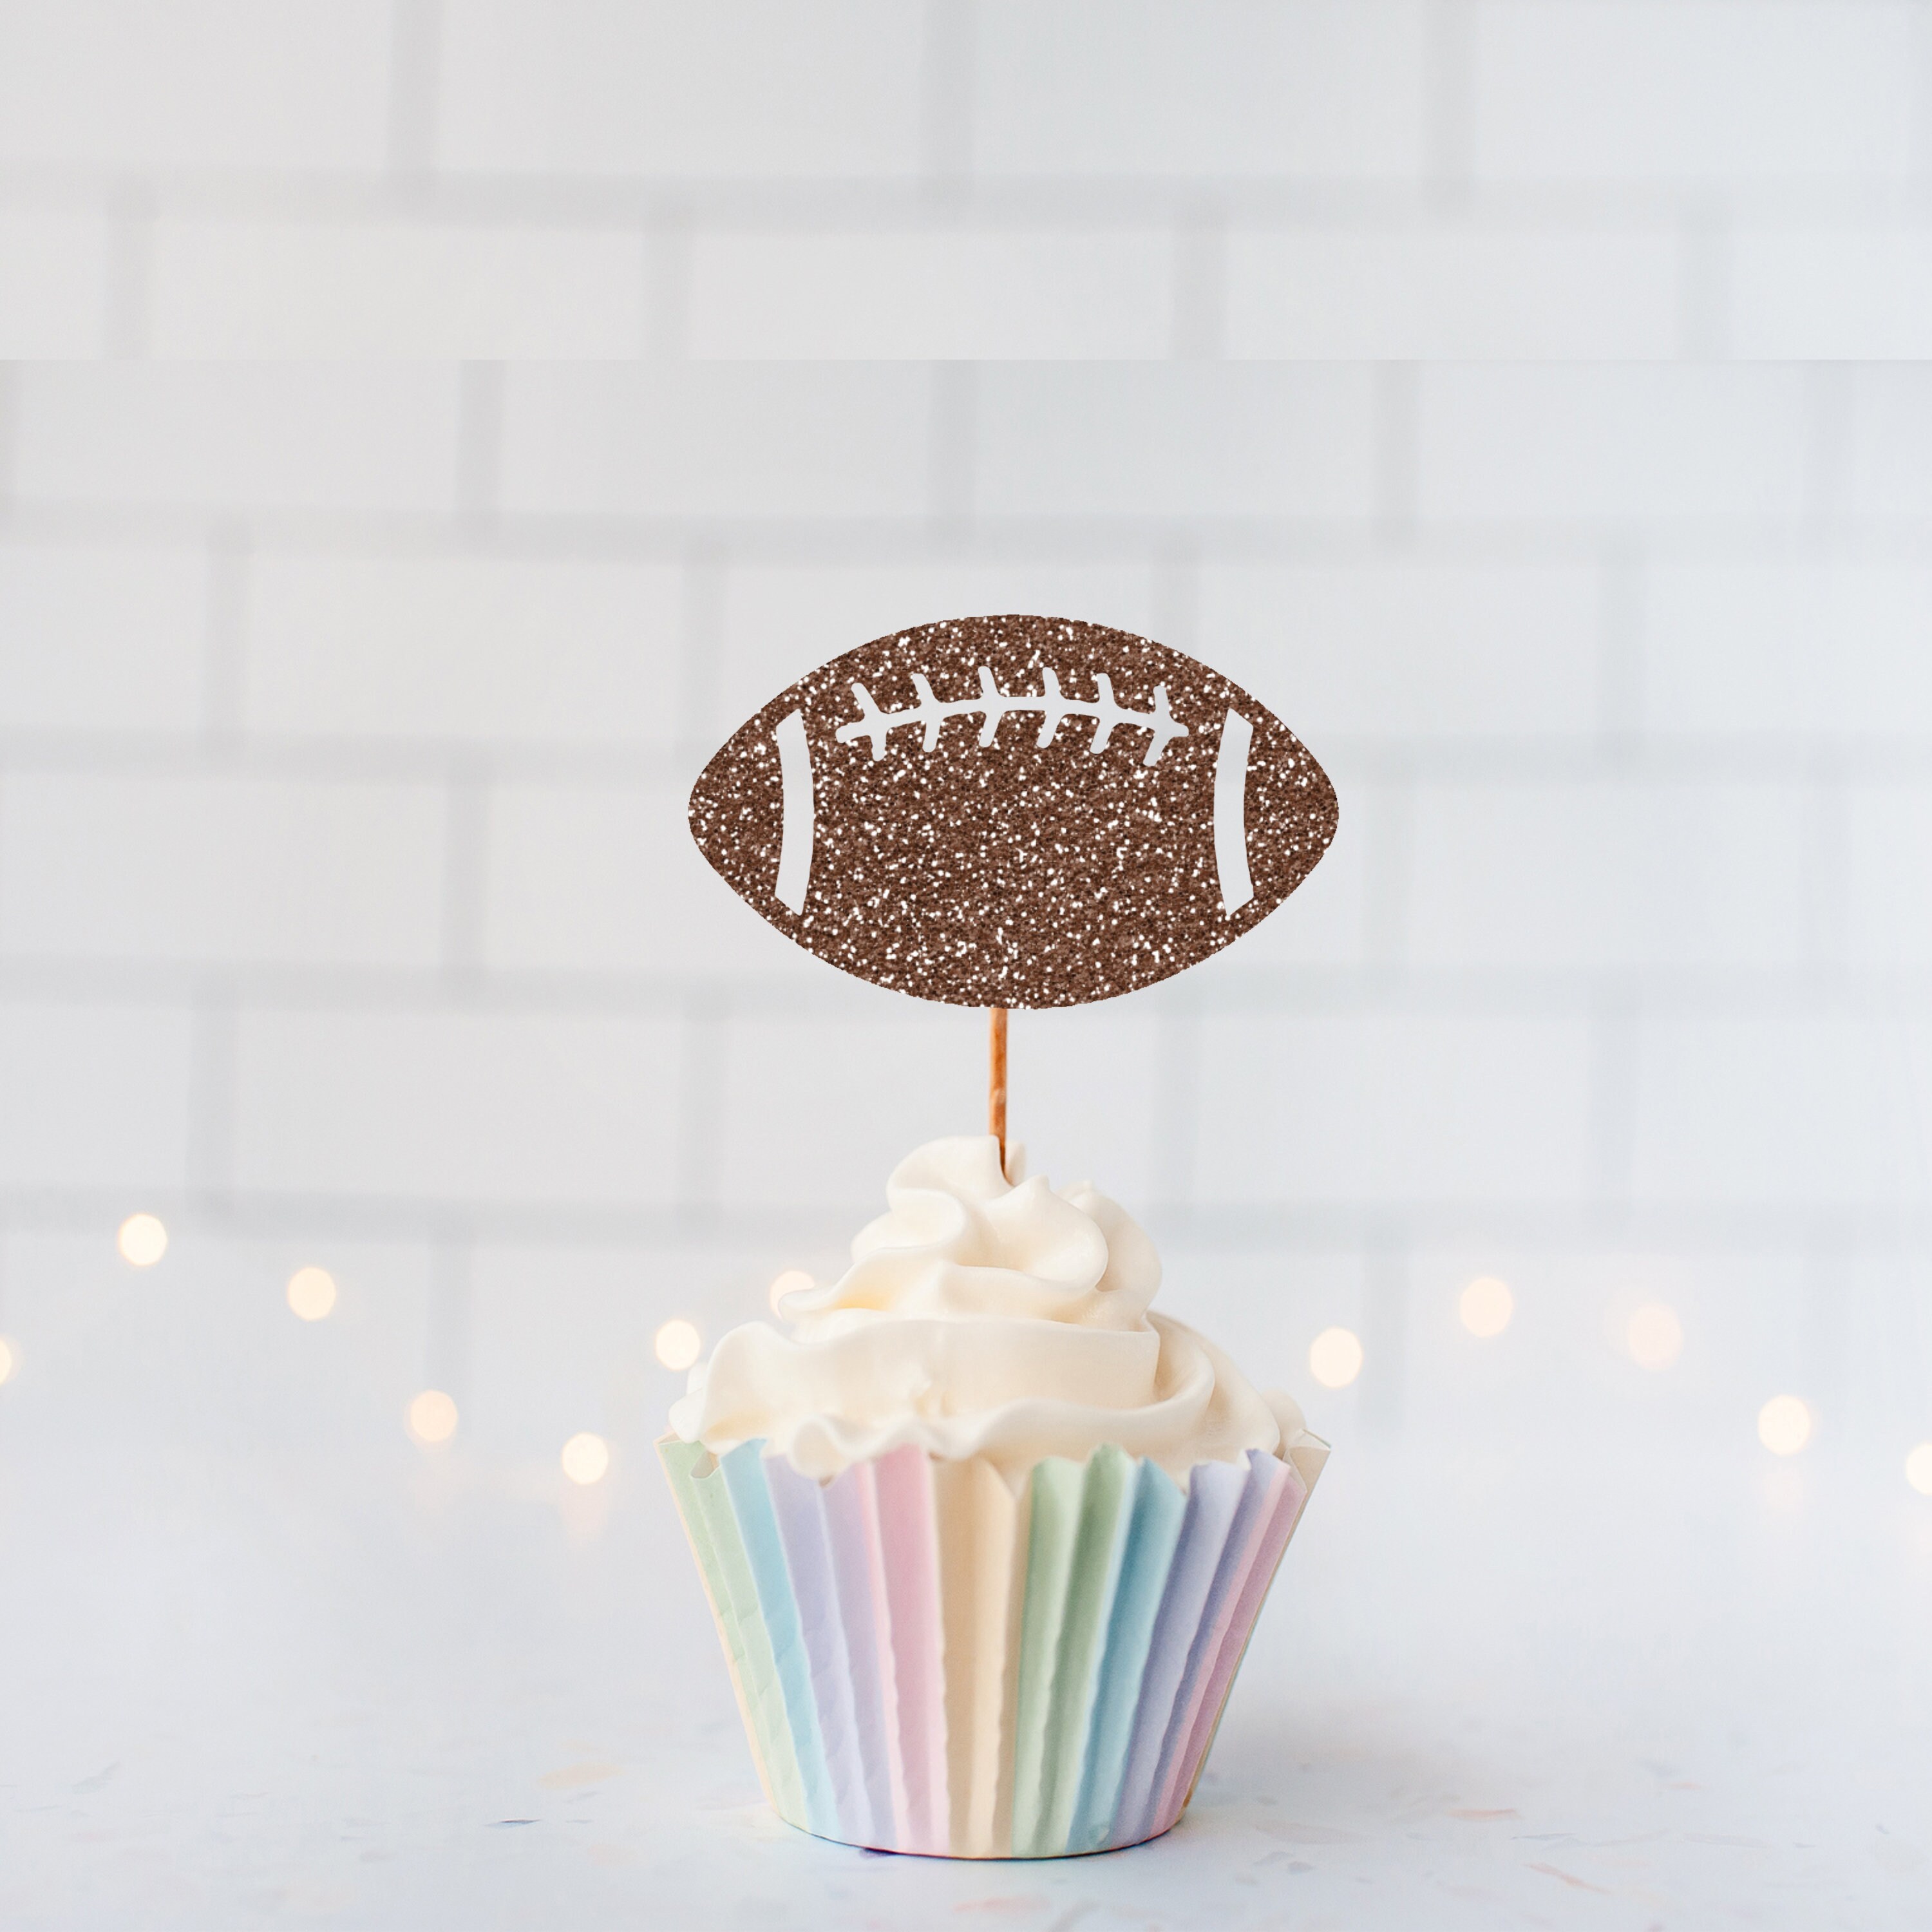 24 Superbowl Super Bowl LVII Football Cupcake Rings Toppers Decorations